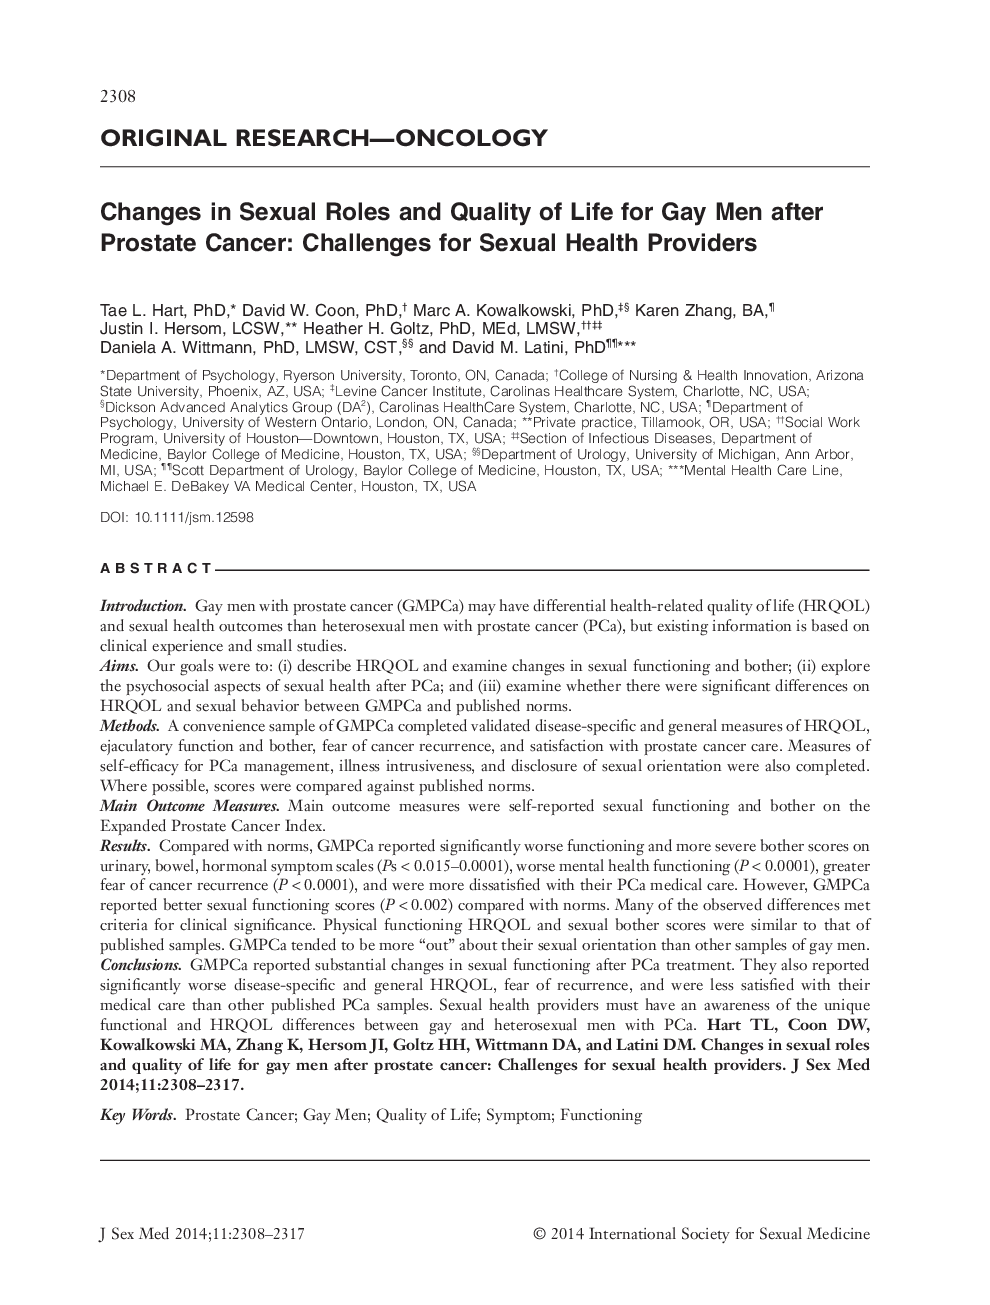 Changes in Sexual Roles and Quality of Life for Gay Men after Prostate Cancer: Challenges for Sexual Health Providers